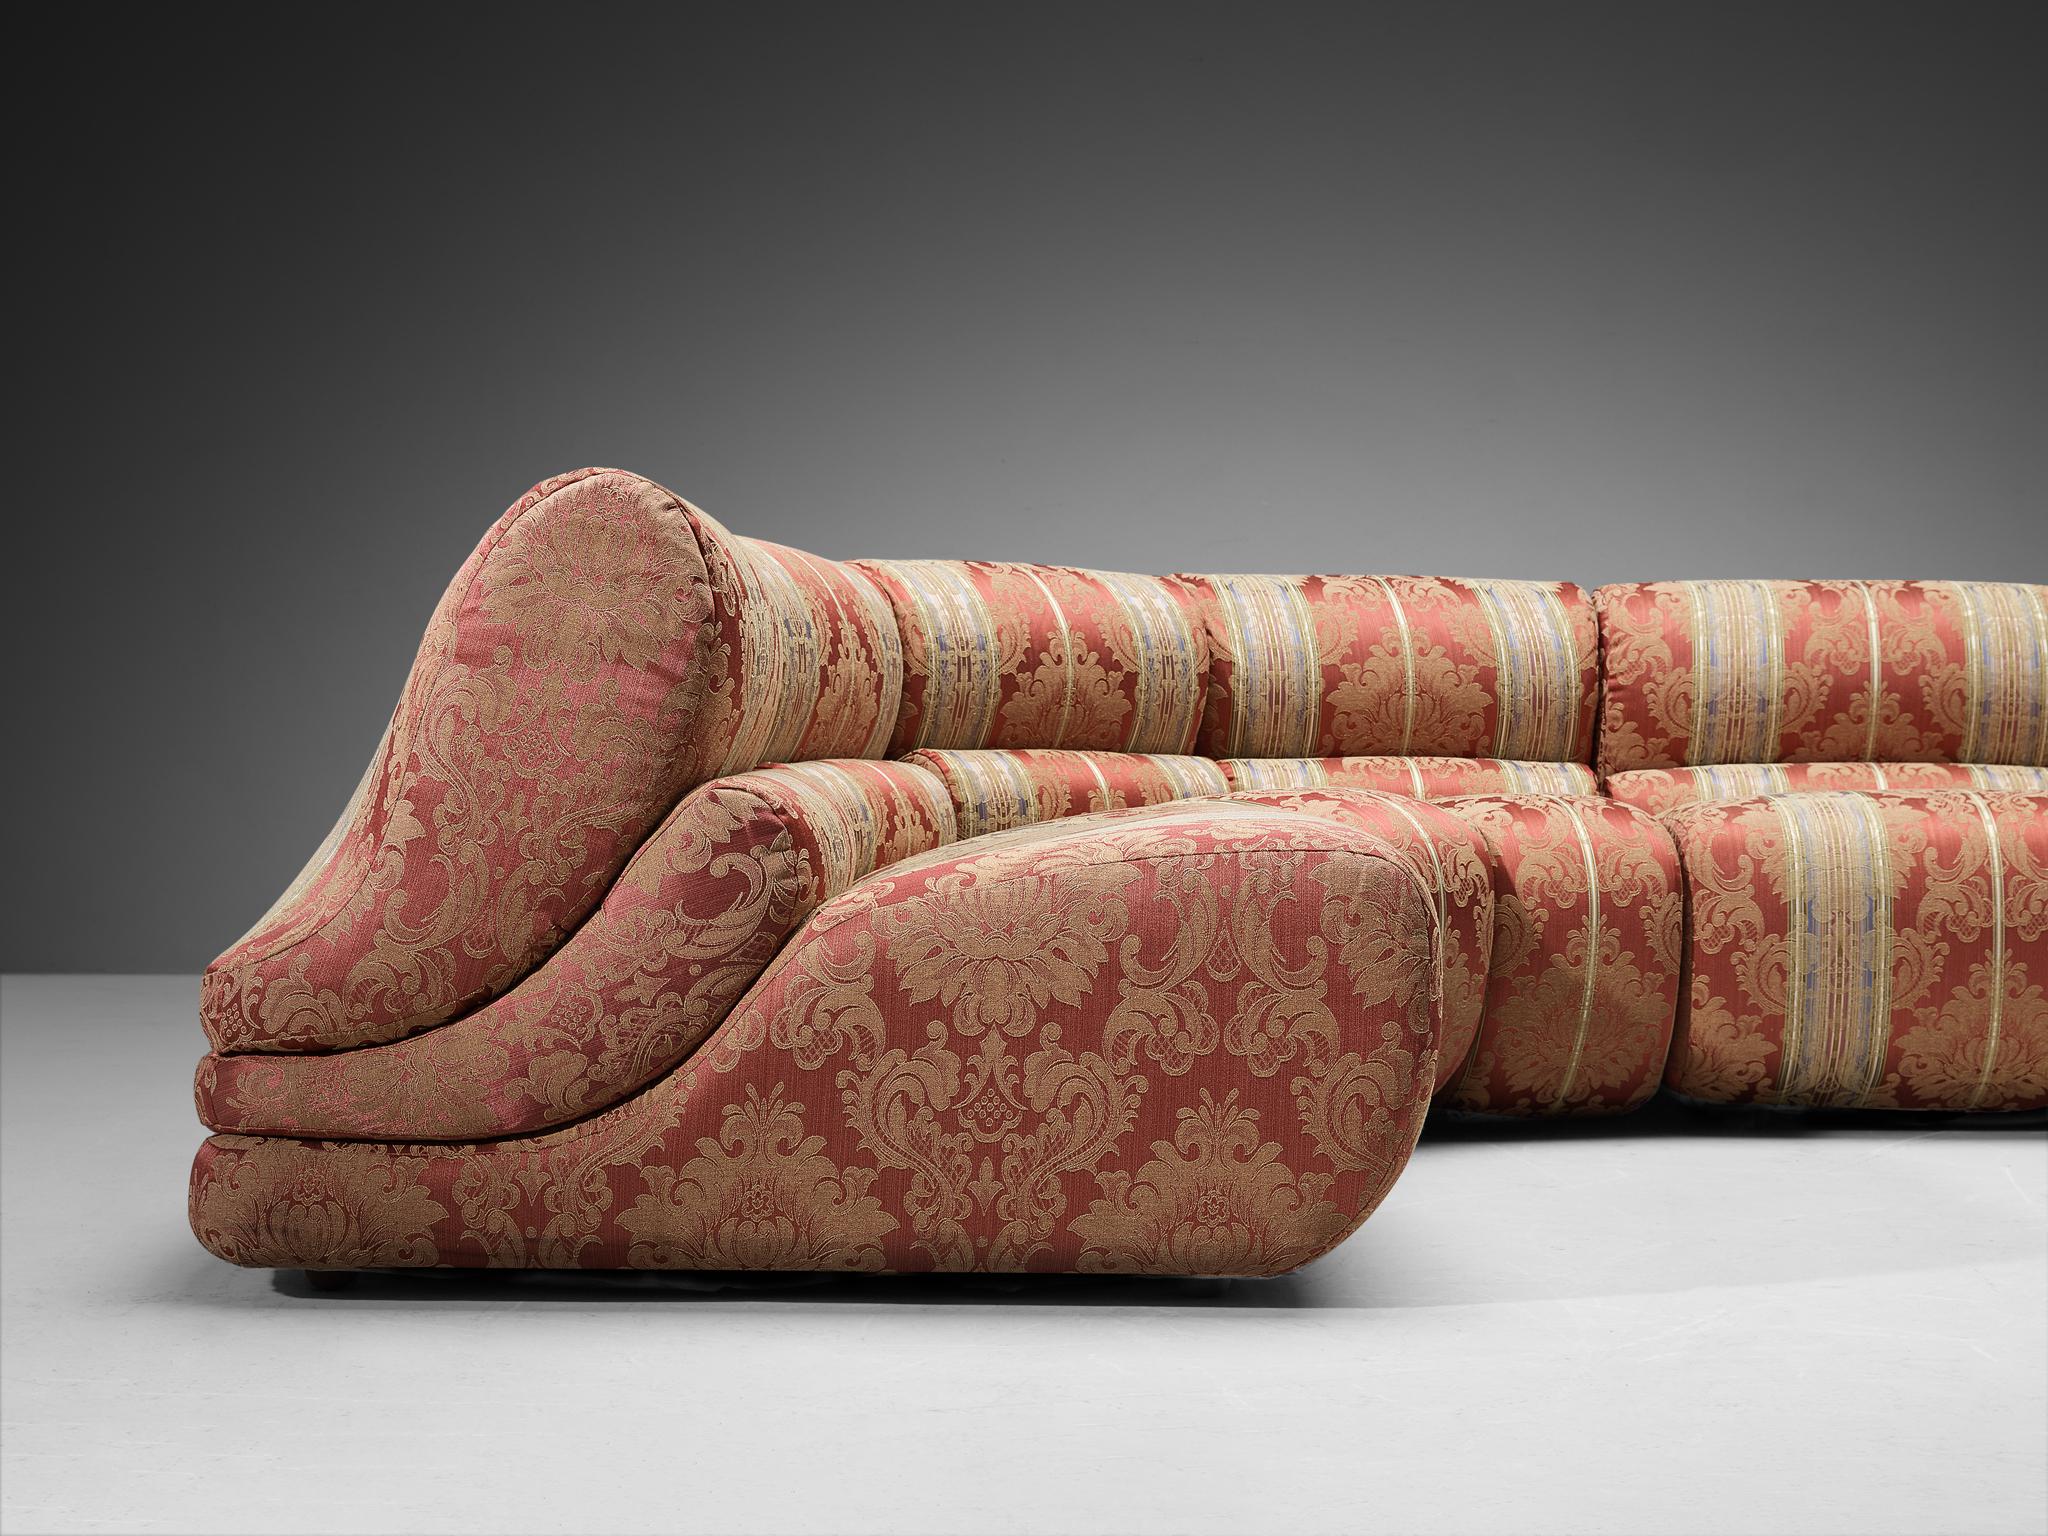 Italian Sectional Sofa in Soft Red Floral Upholstery